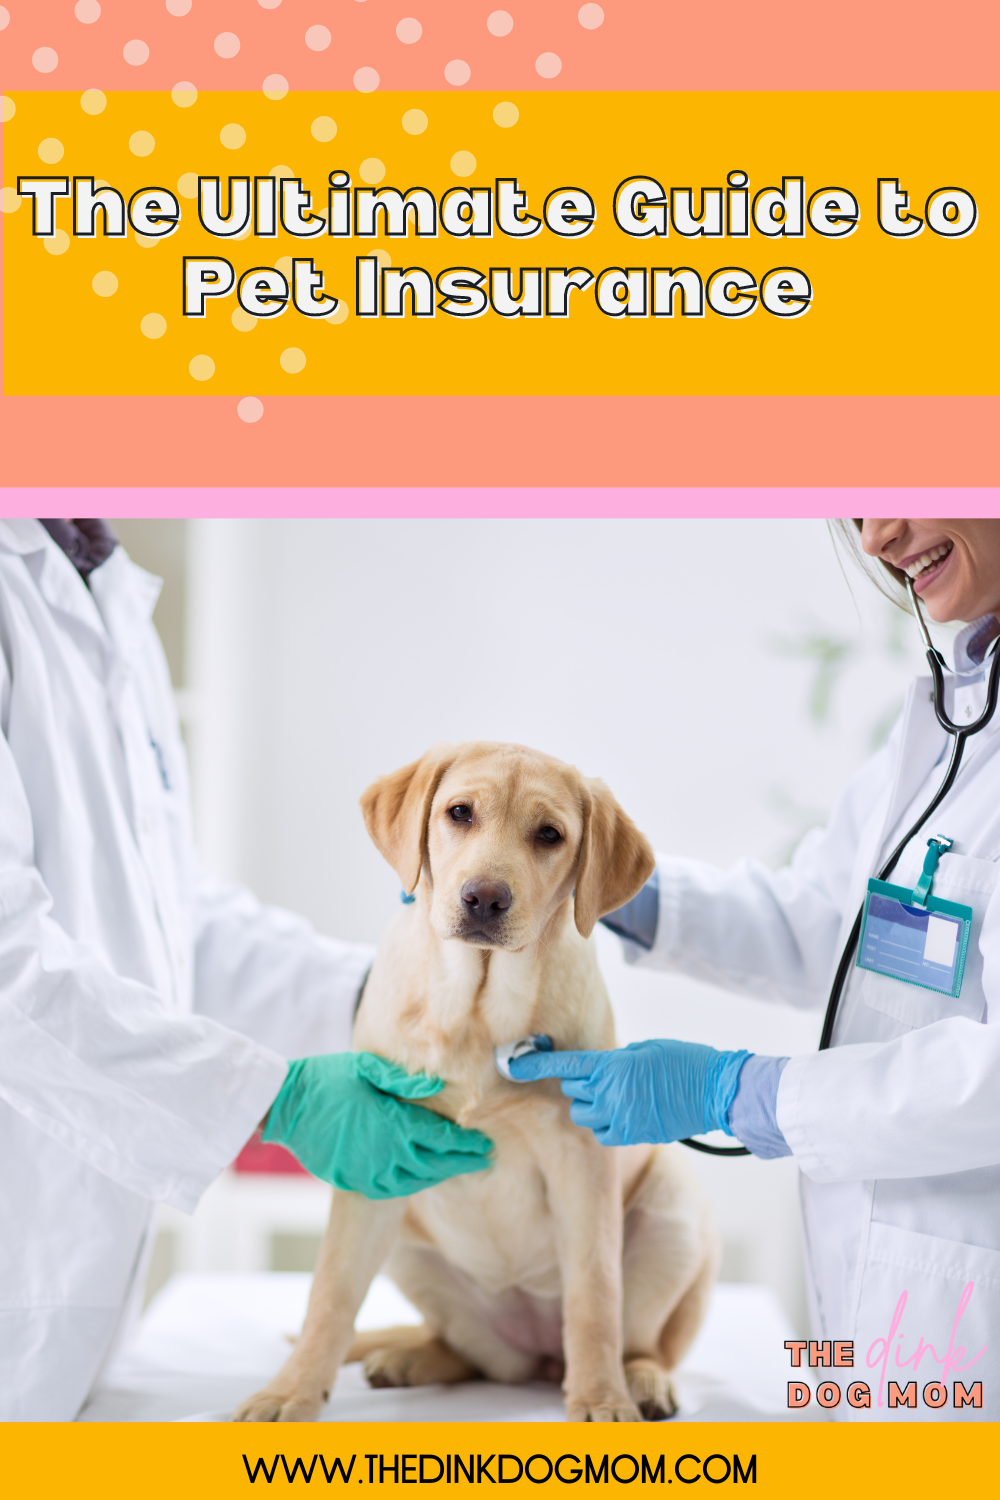 The Ultimate Guide to Pet Insurance